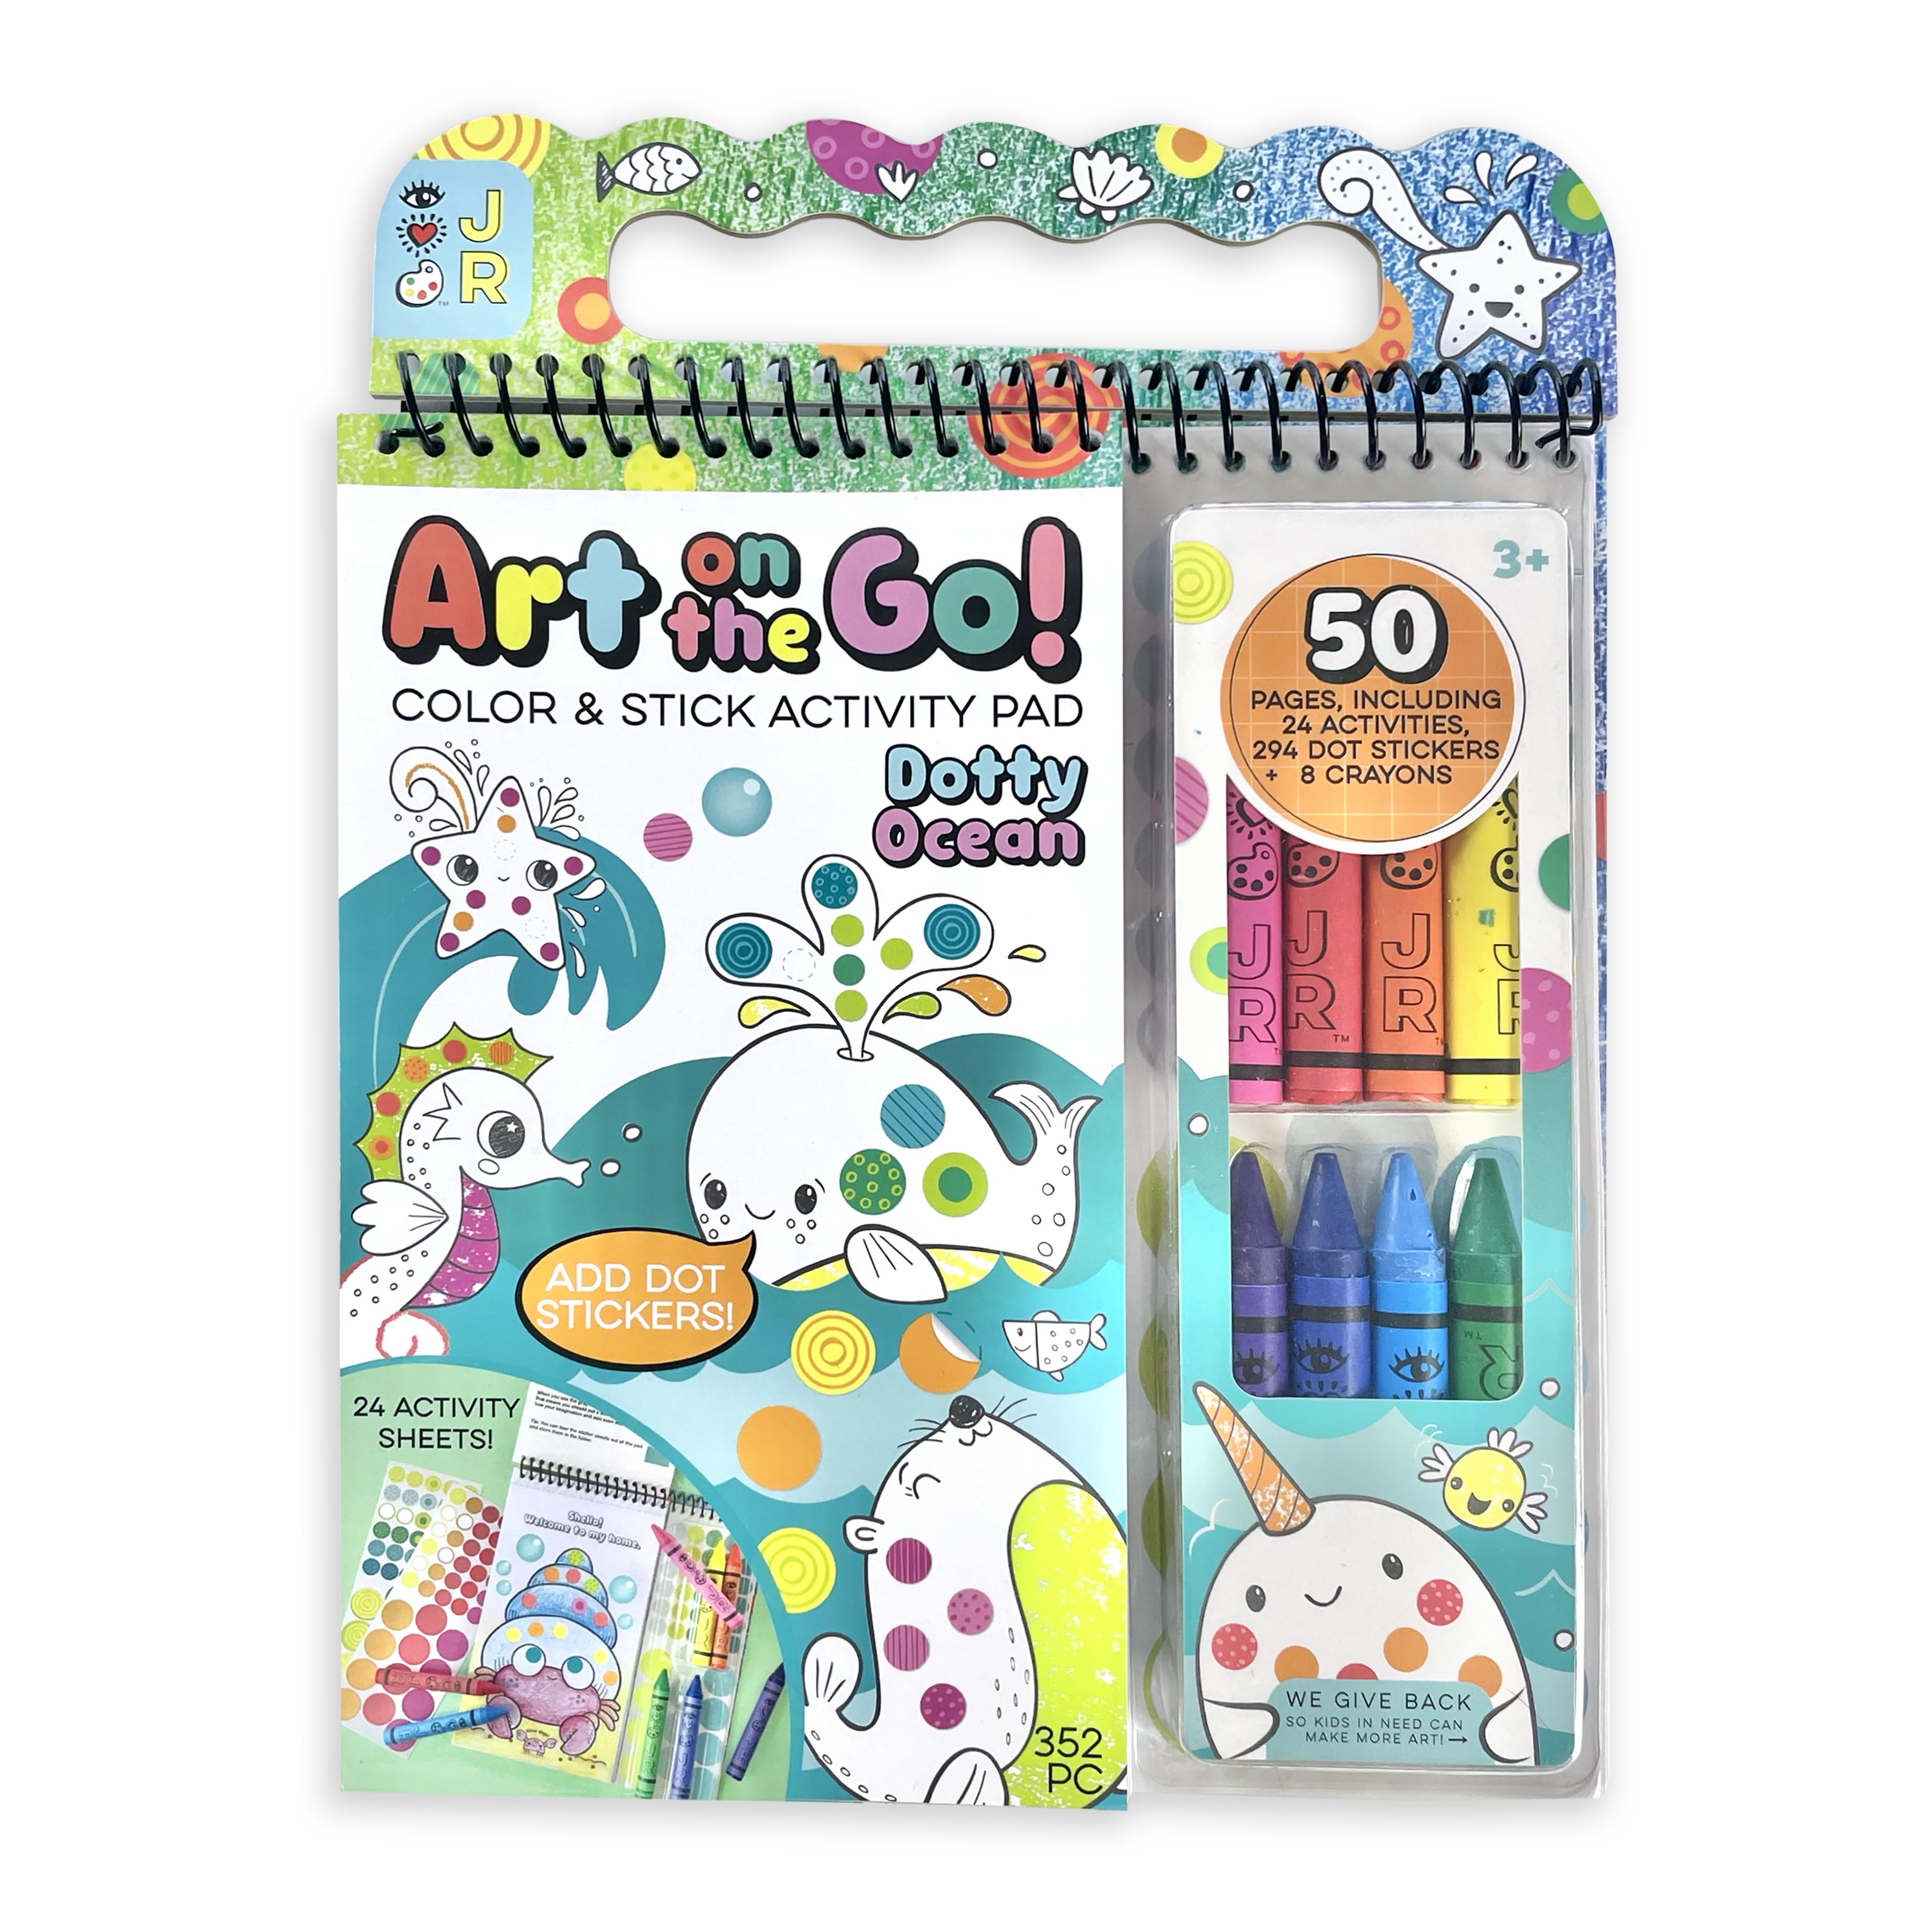 Bright Stripes iHeartArt Art on the Go! Going Dotty Ocean Activity Pad